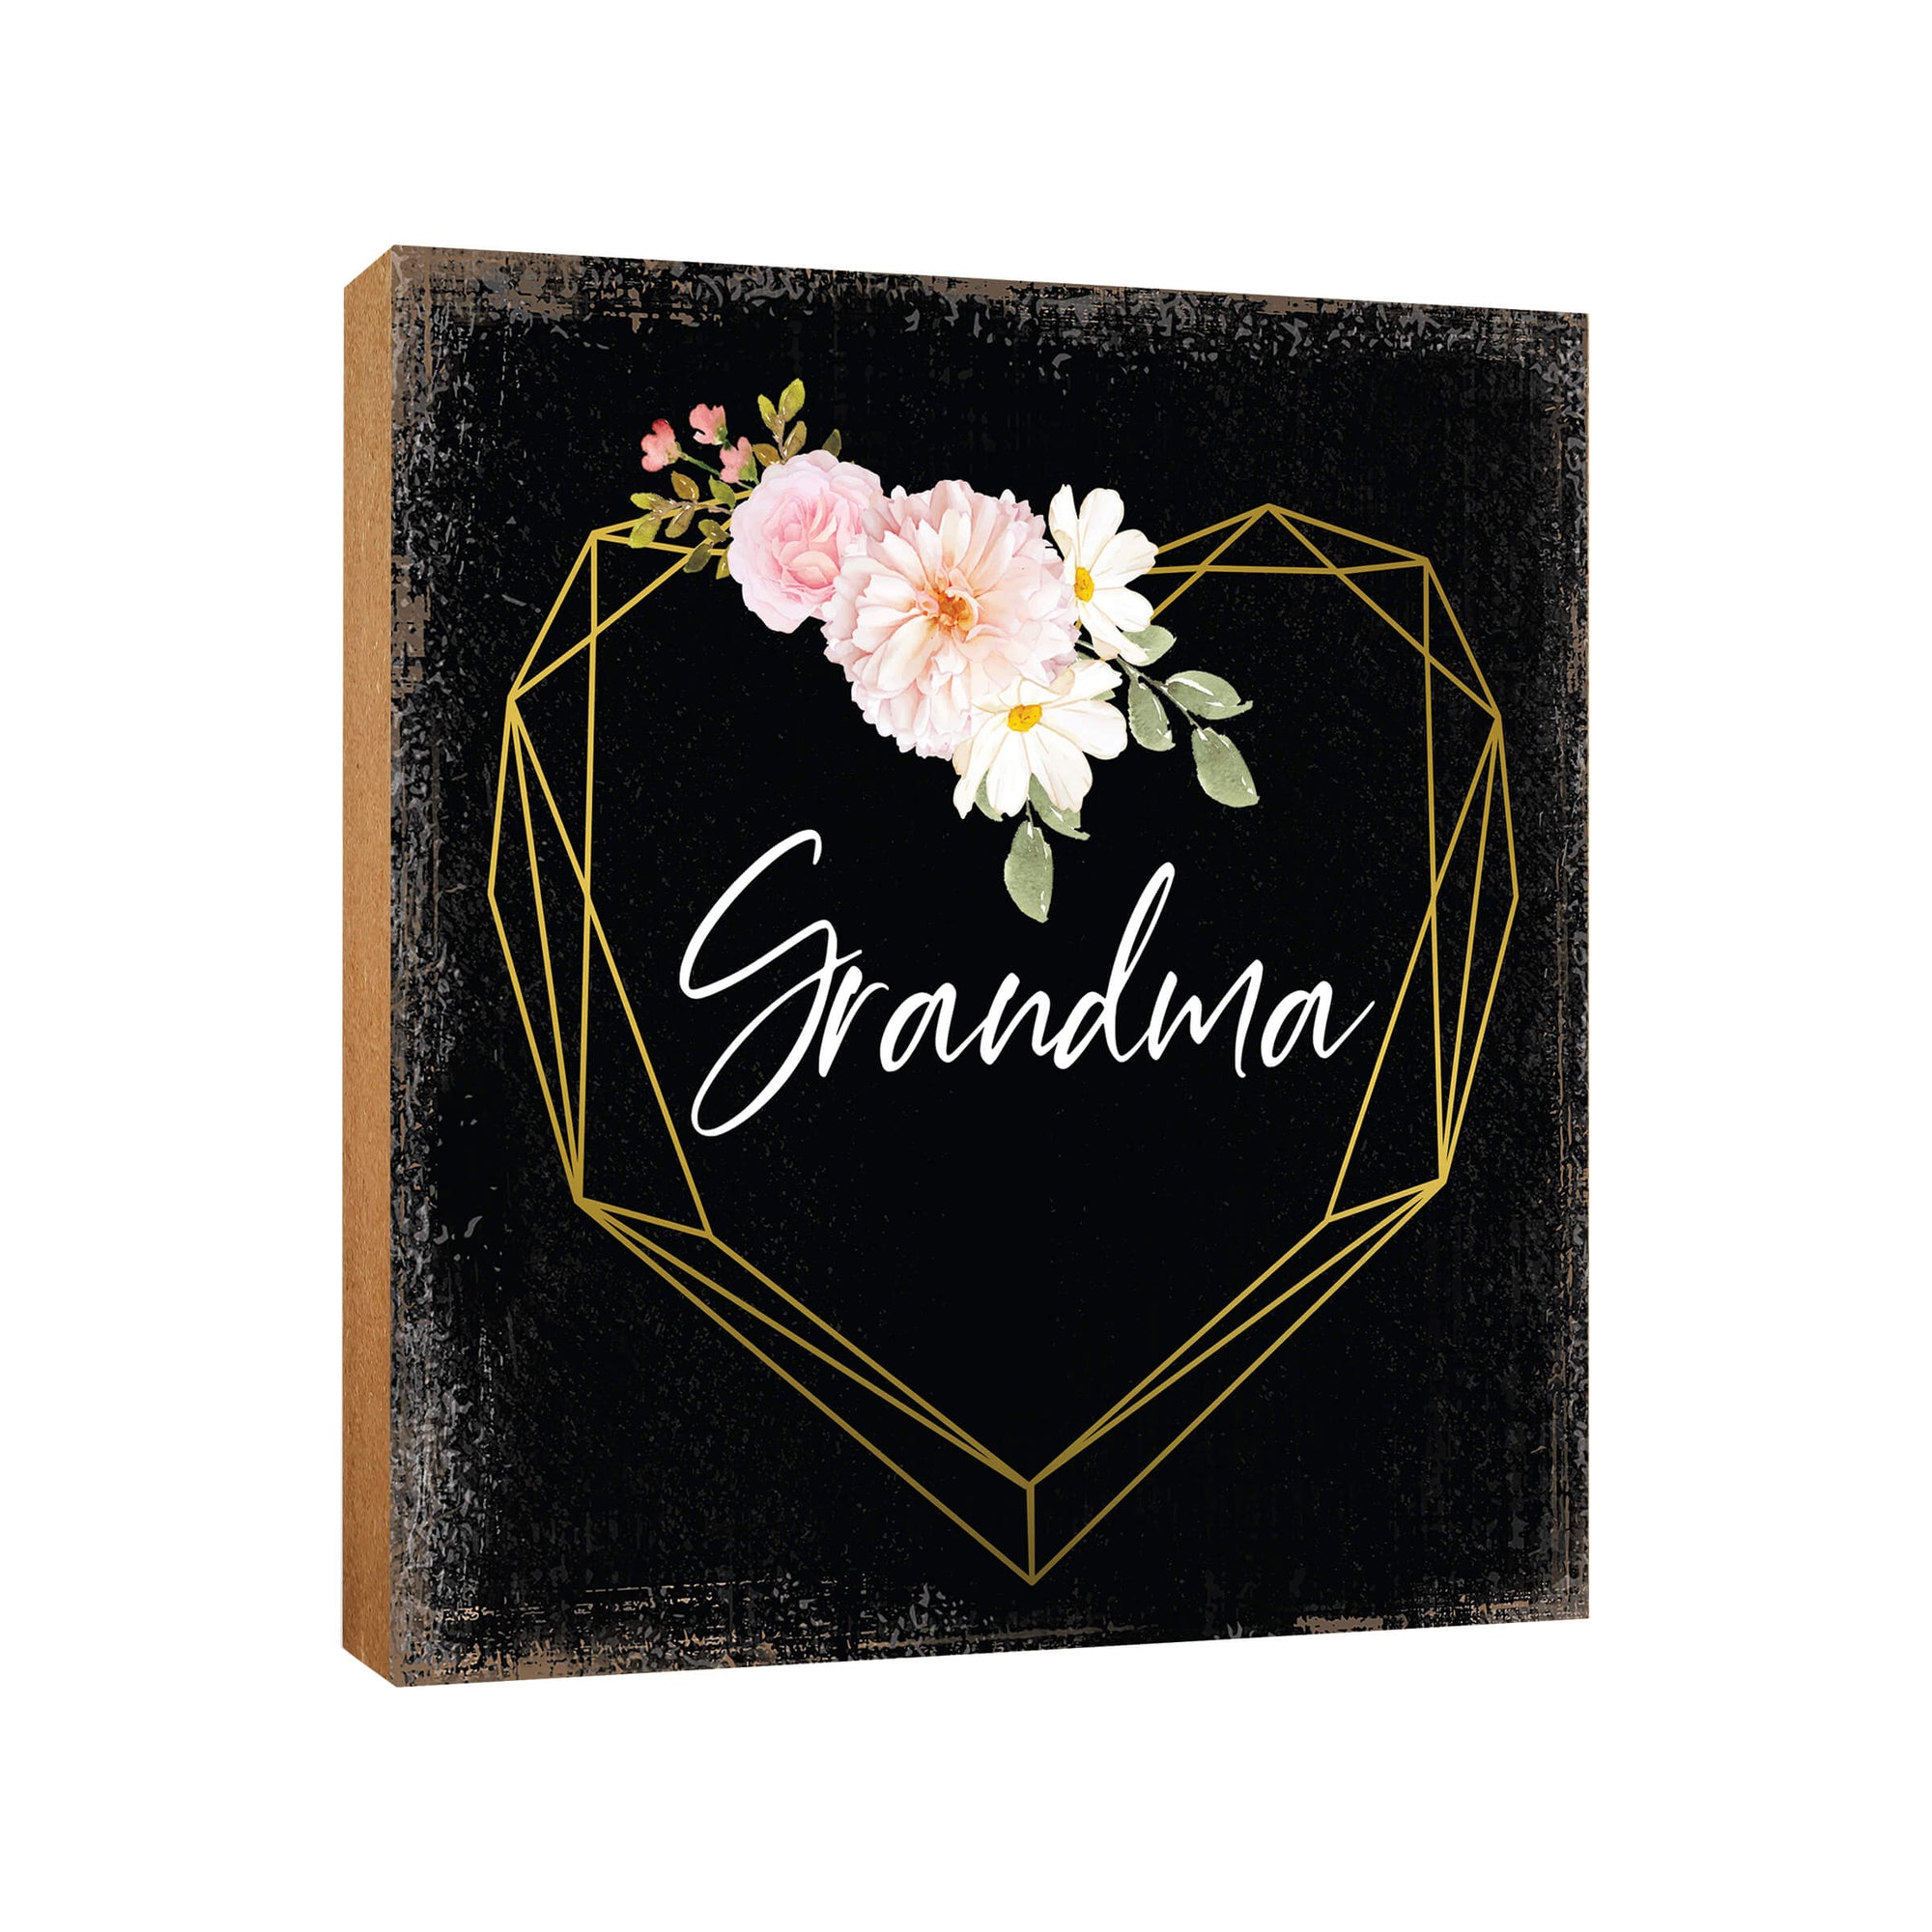 Elegant Home Decor Gift - Unique Shelf Decor and Tabletop Signs, Ideal Mother's Day Gift for Your Beloved Grandmother